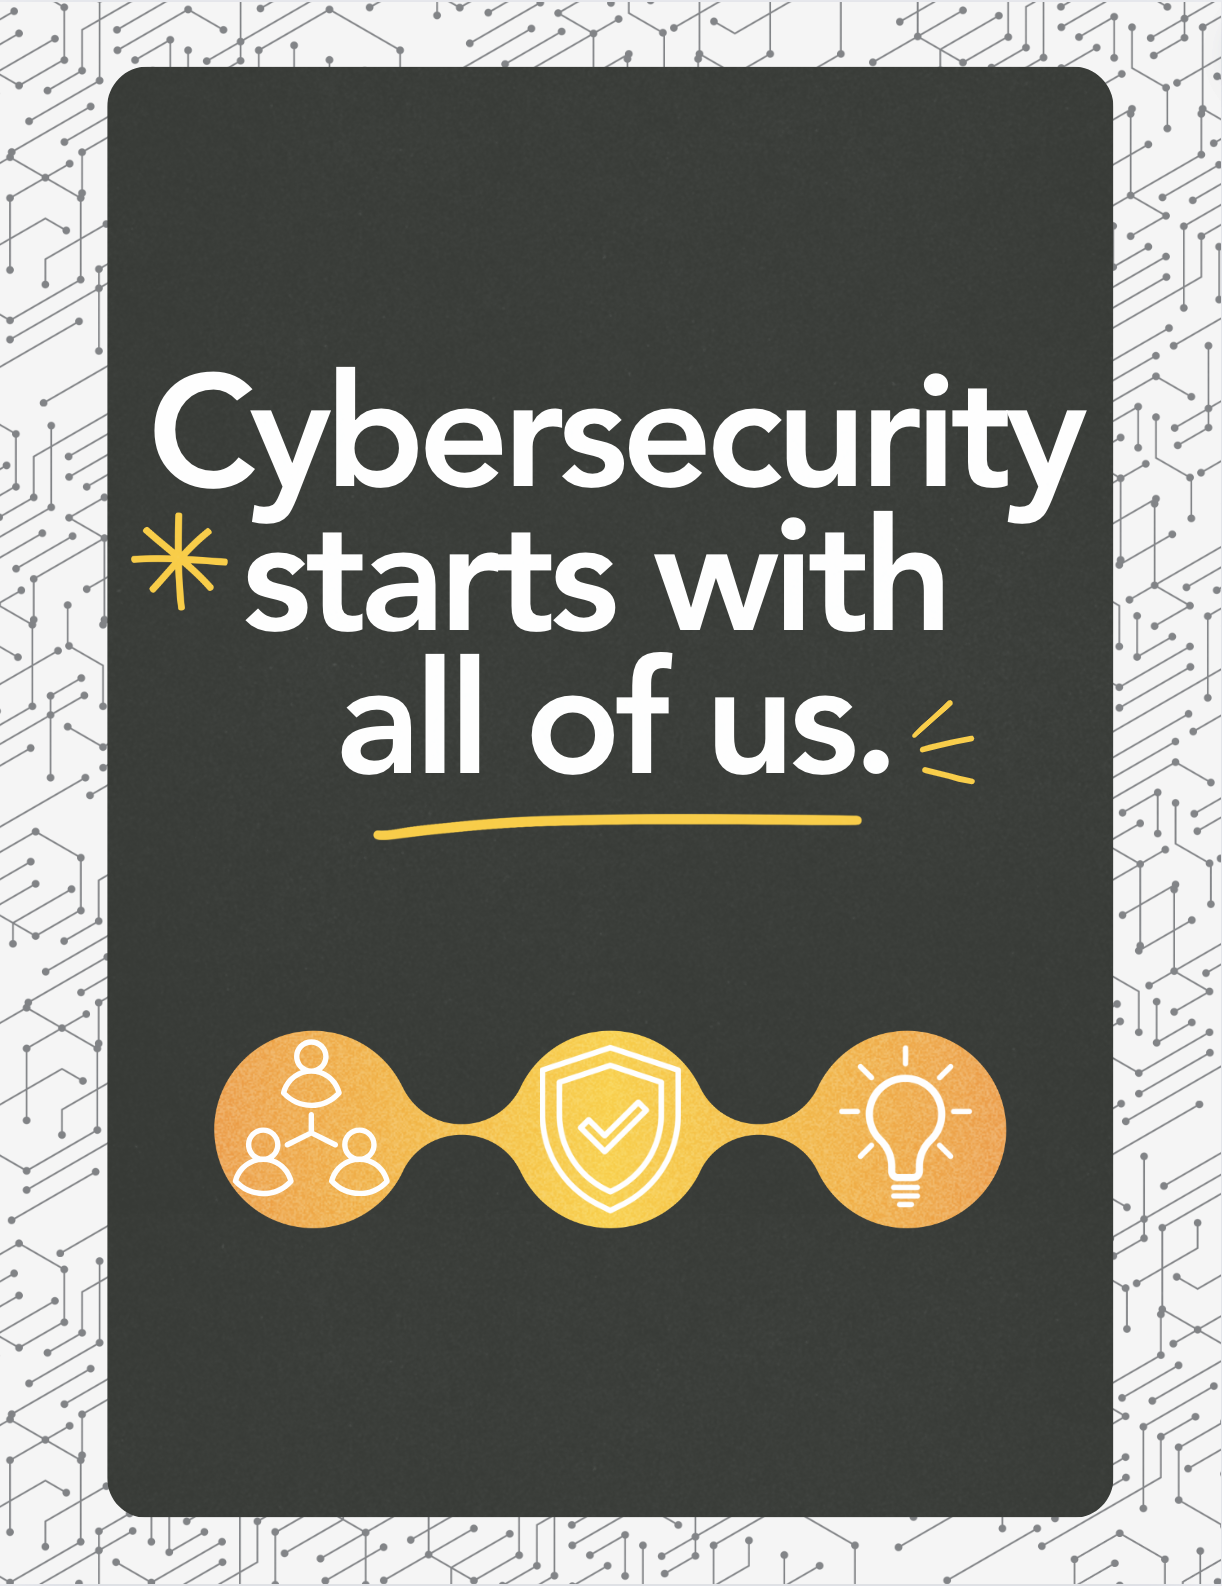 cybersecurity starts with all of us